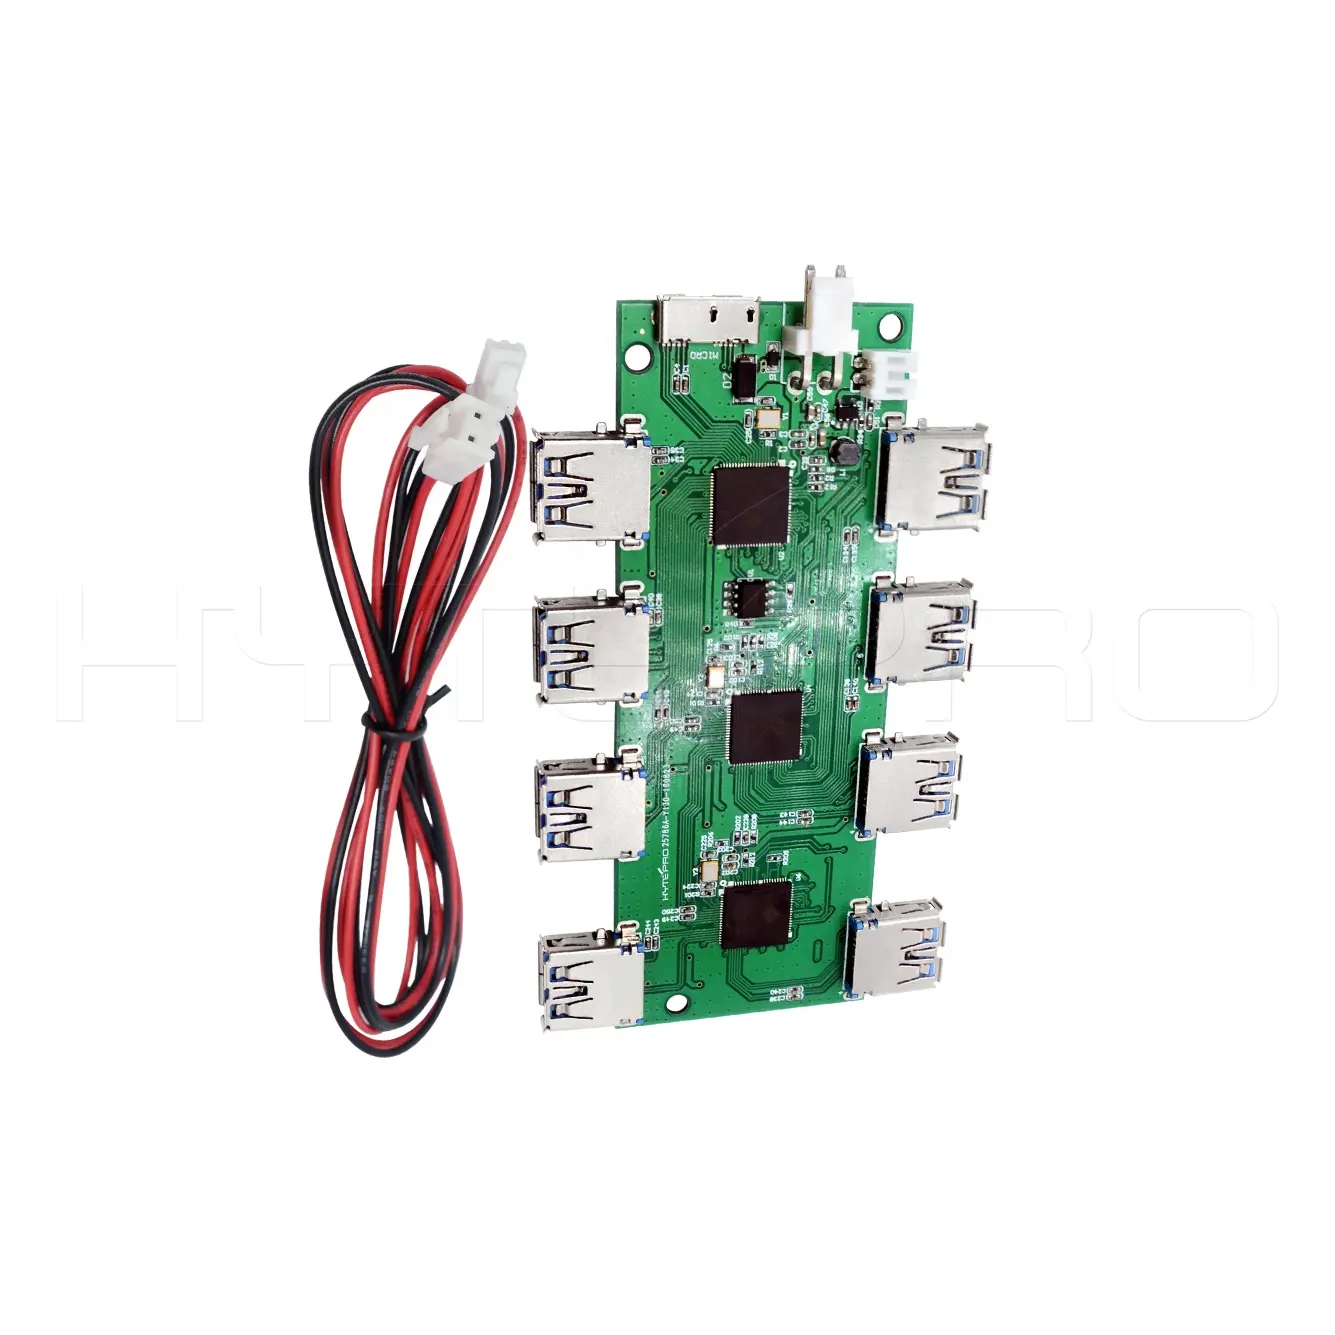 Double 8 port USB hub 3.0 PCB board module for data transfer and charger